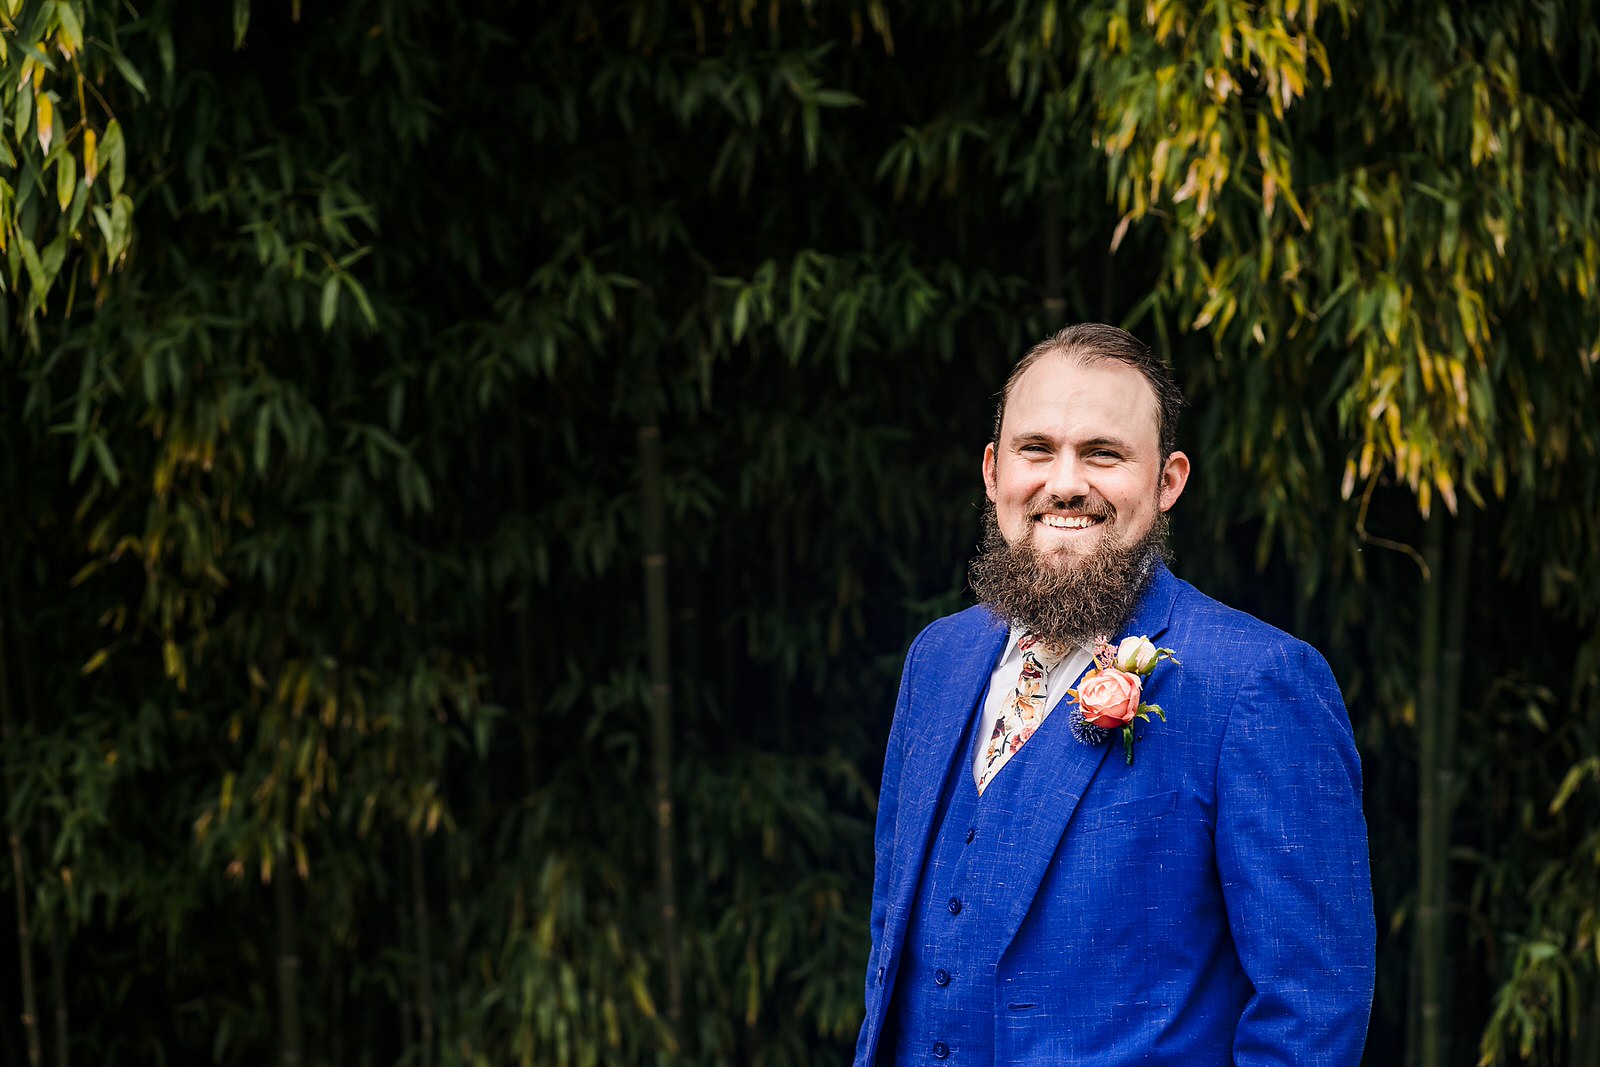 Groom style: blue tux and floral tie from Generation Tux